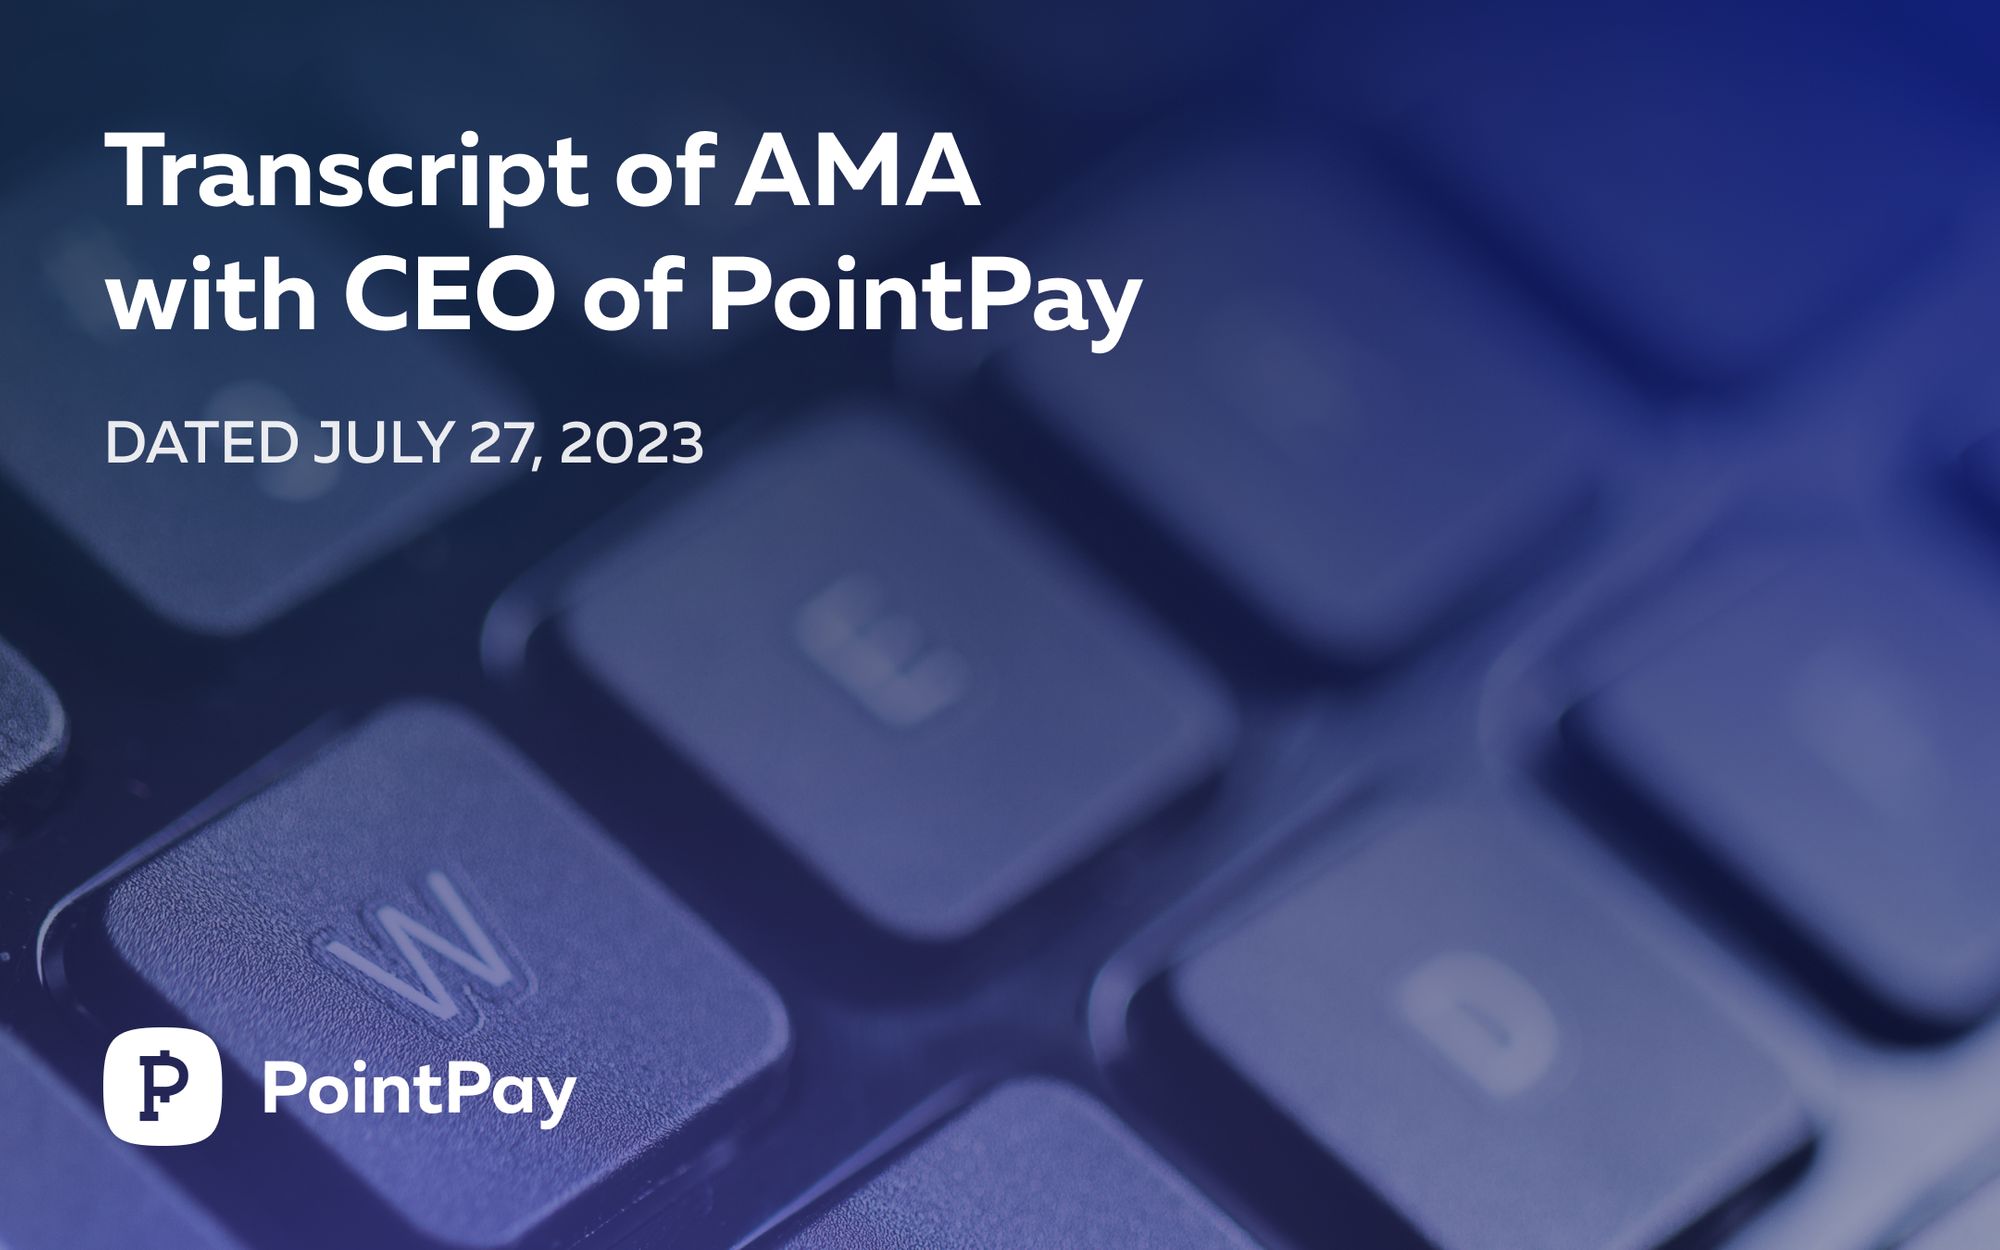 Transcript of AMA with CEO of PointPay – Vladimir Kardapoltsev, 27 July 2023